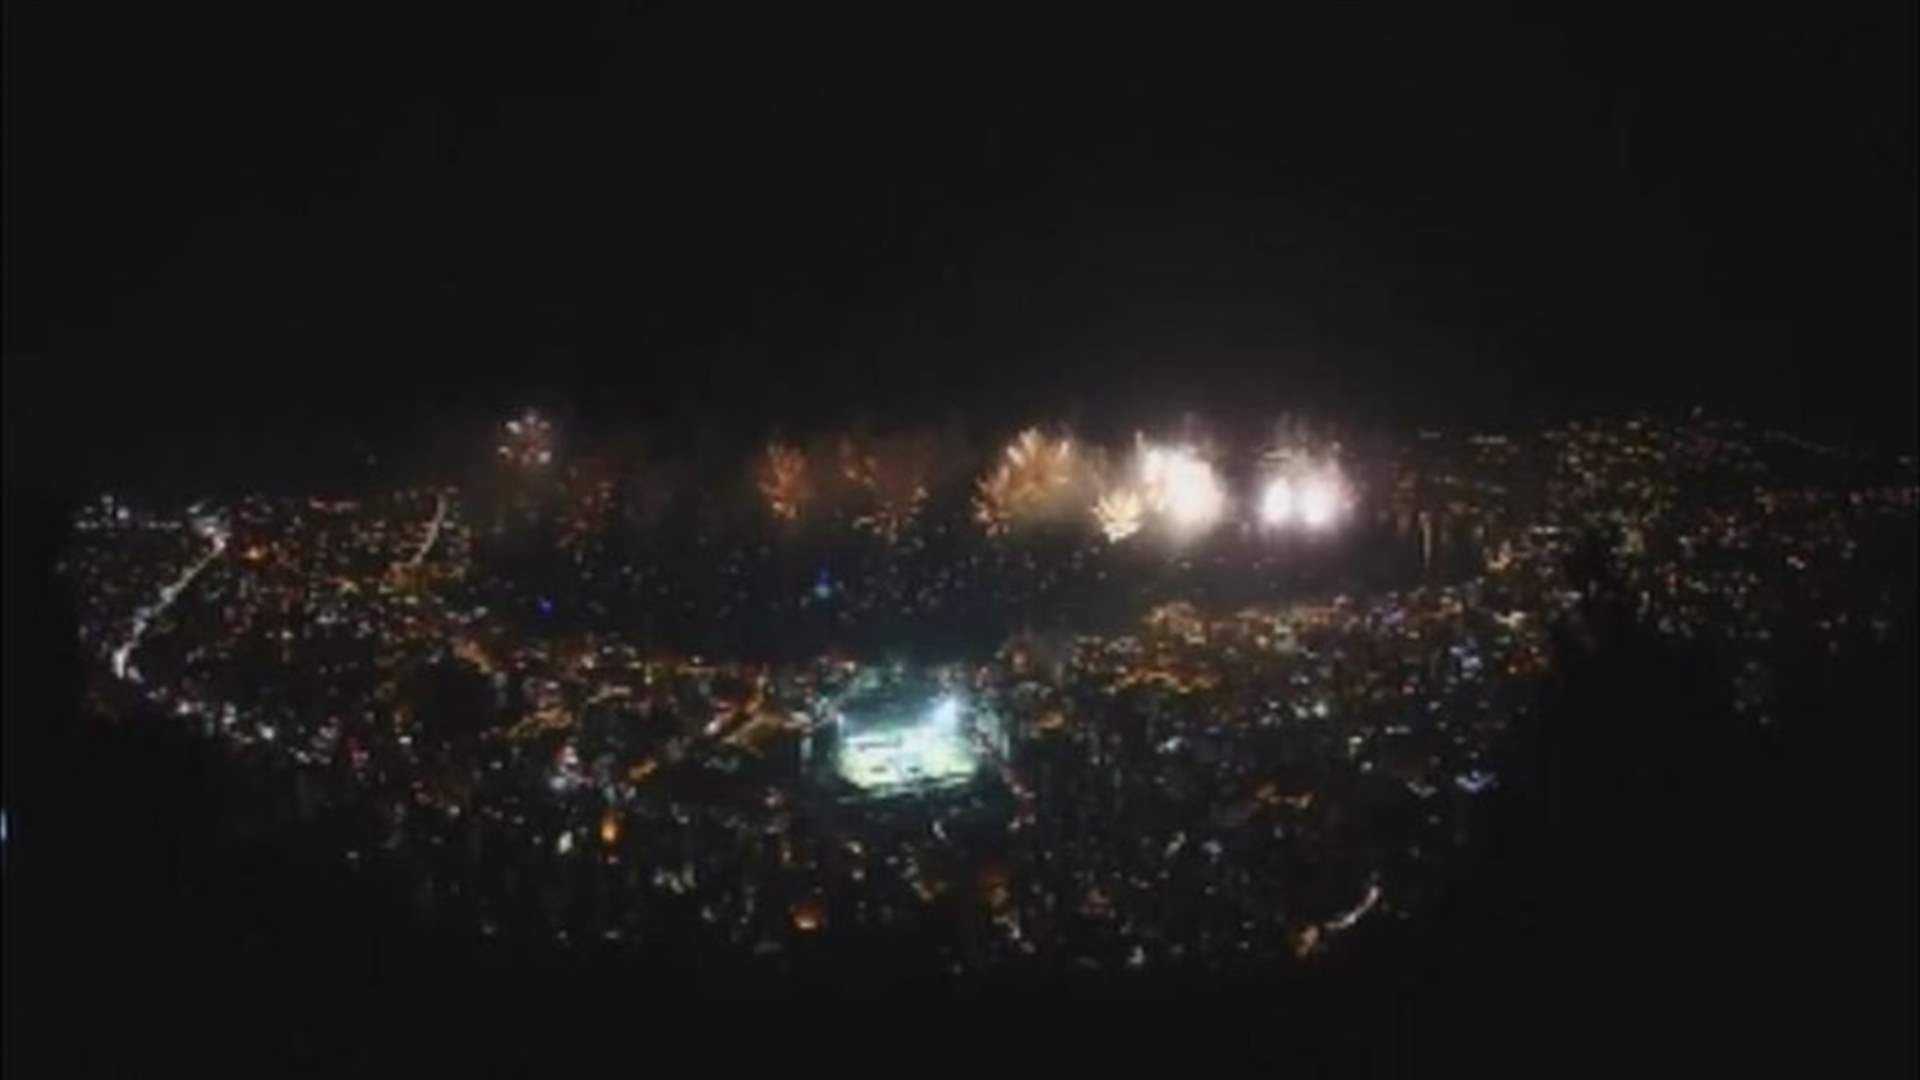 REPORT: Jounieh festival to kick off with fireworks show